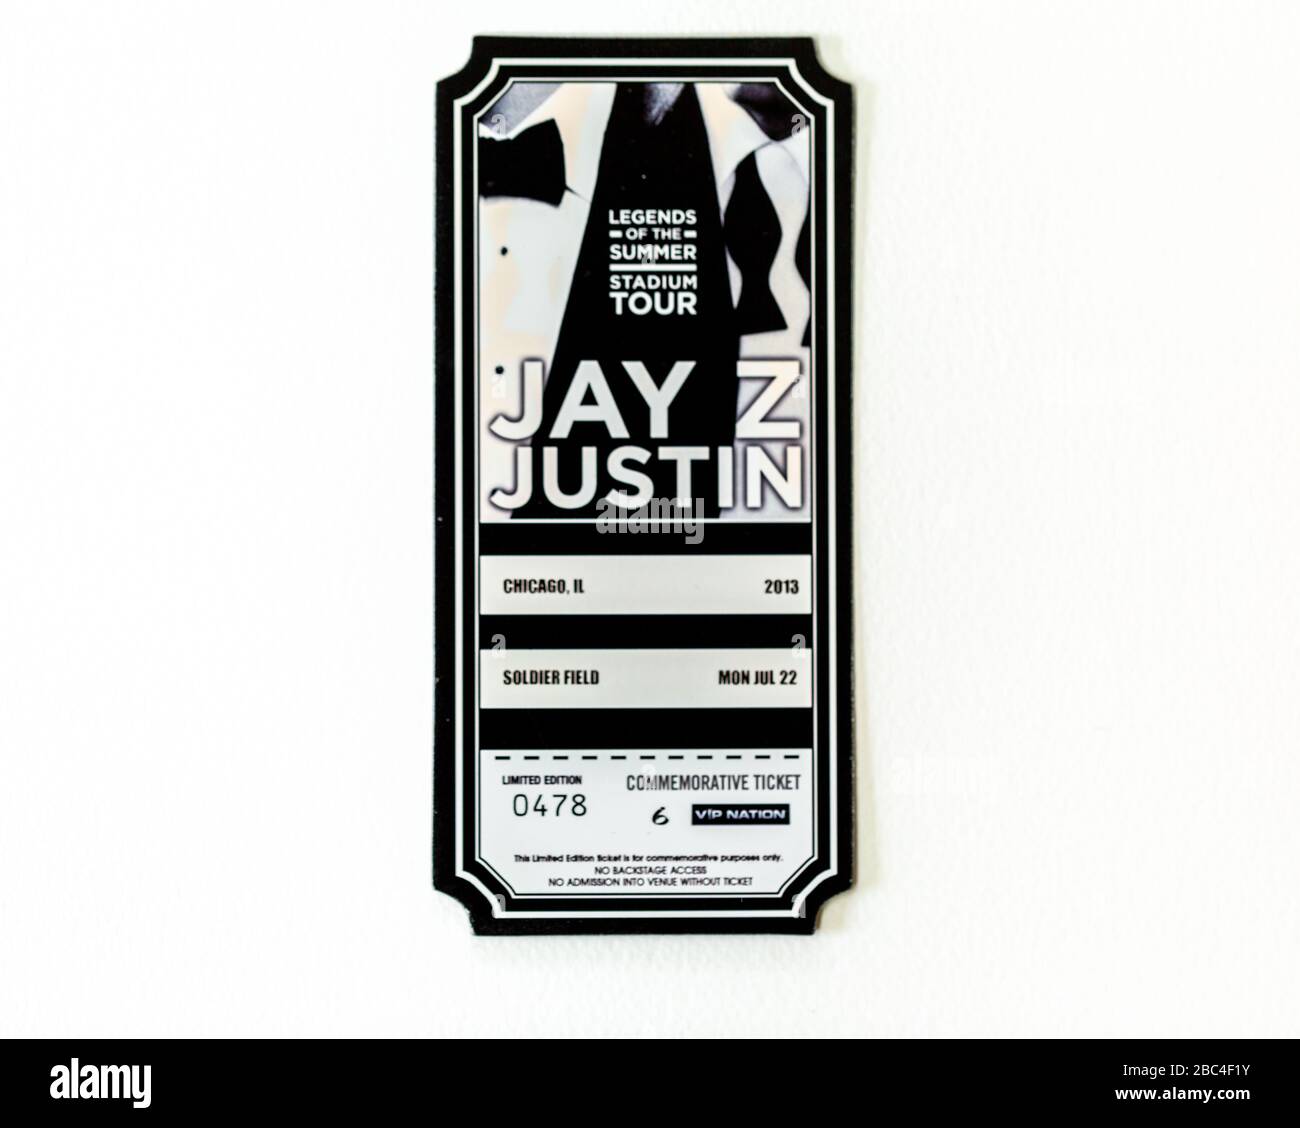 Legends of the Summer Stadium Tour, Jay Z and Justin Timberlake VIP-Ticket Stockfoto